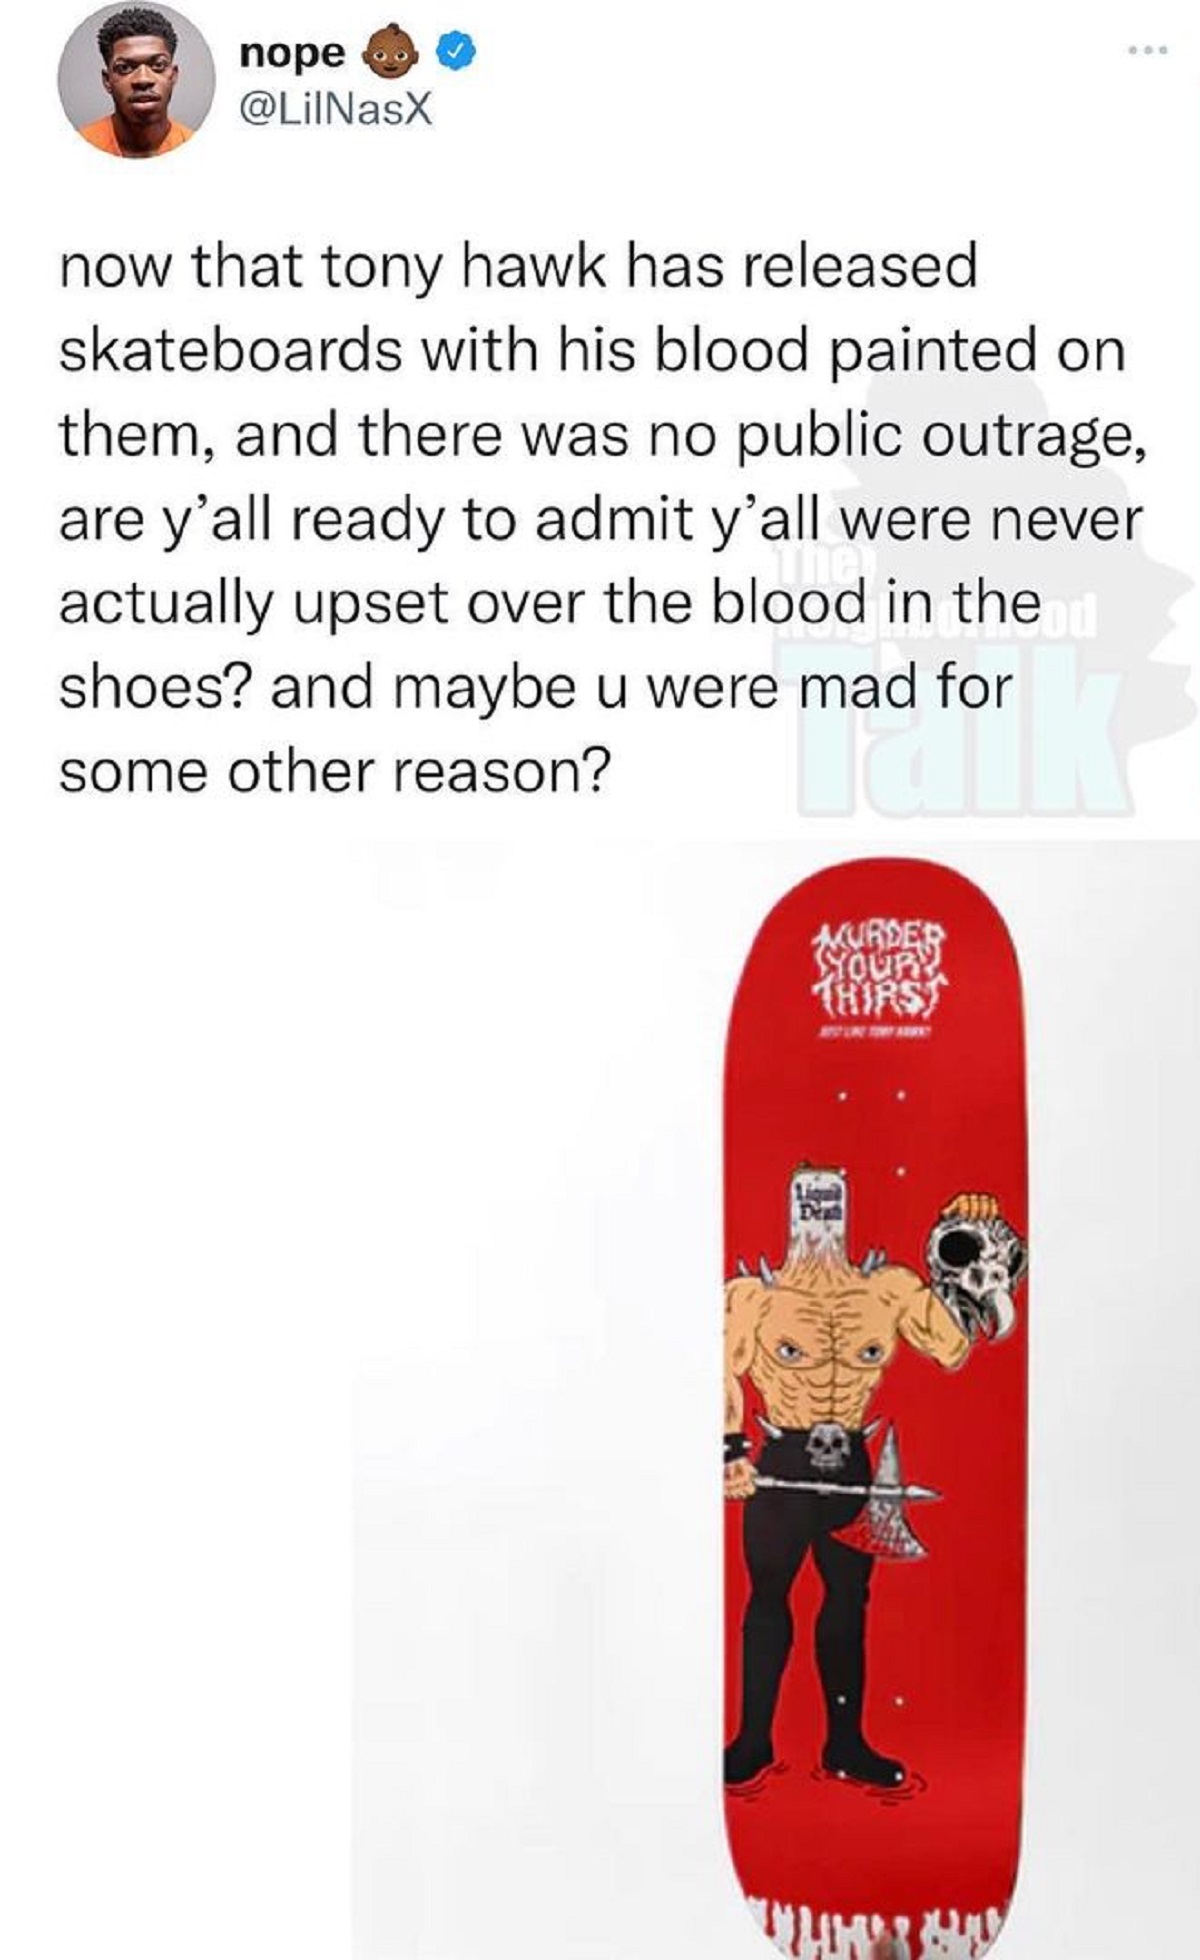 Lil Nas X asks why no one is outraged over Tony Hawk releasing skateboard painted in his own blood